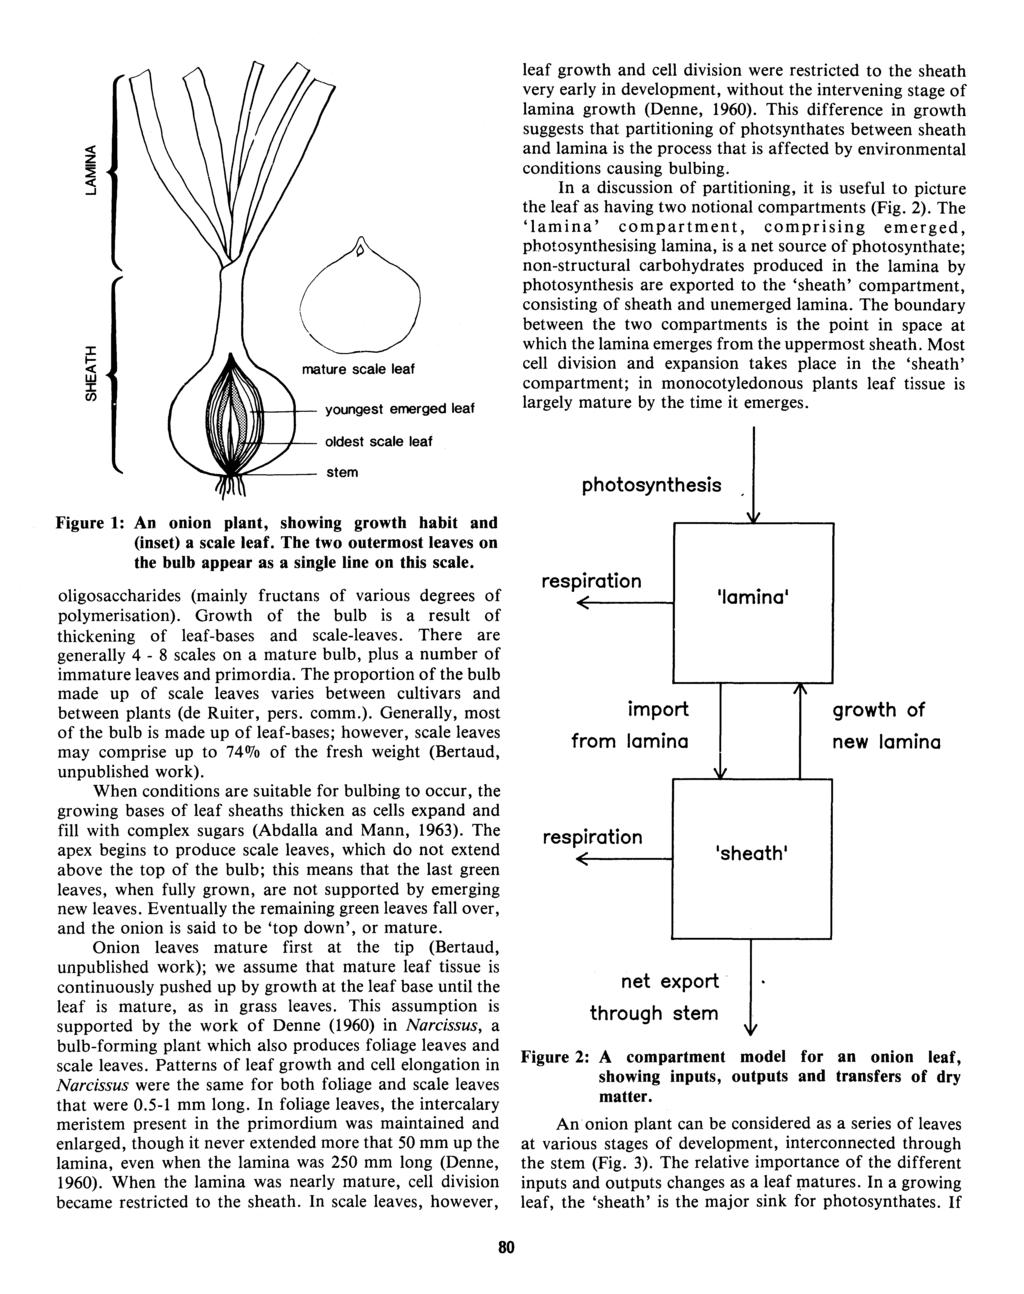 leaf growth and cell division were restricted to the sheath very early in development, without the intervening stage of lamina growth (Denne, 1960).